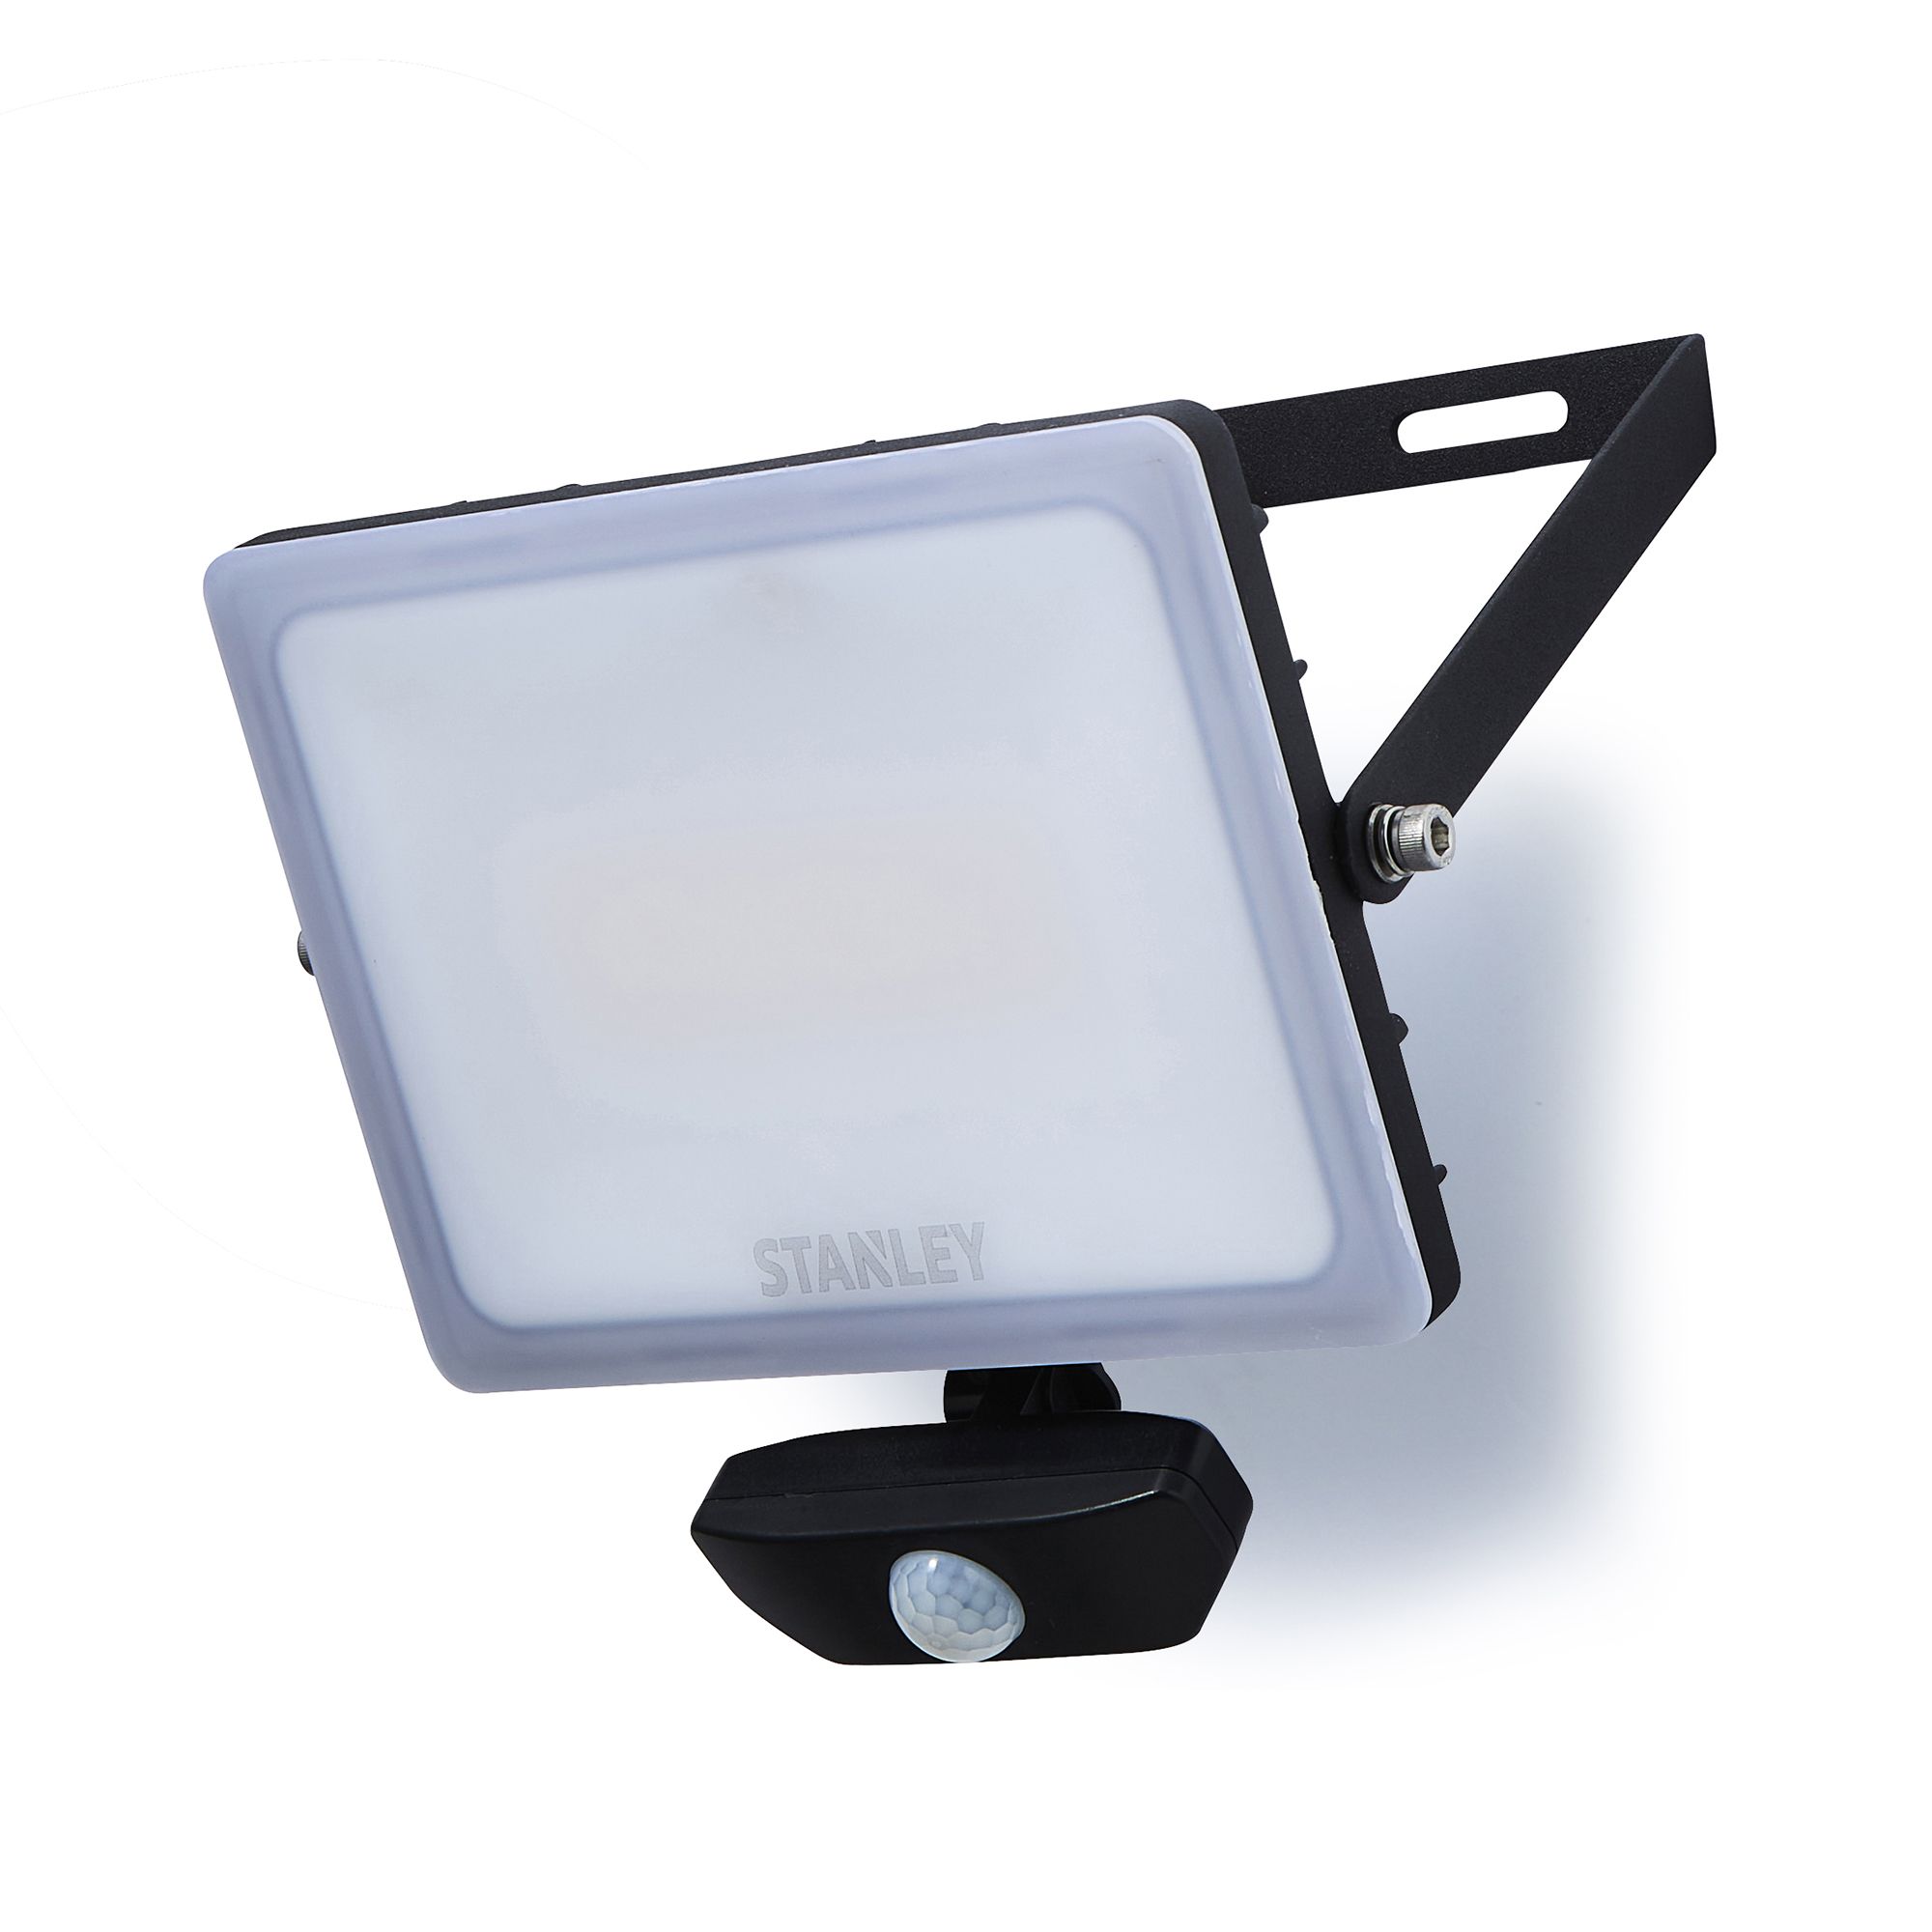 Stanley Frosted Floodlights Black / Frosted Opal Mains-powered Cool daylight LED PIR Slimline floodlight 4500lm